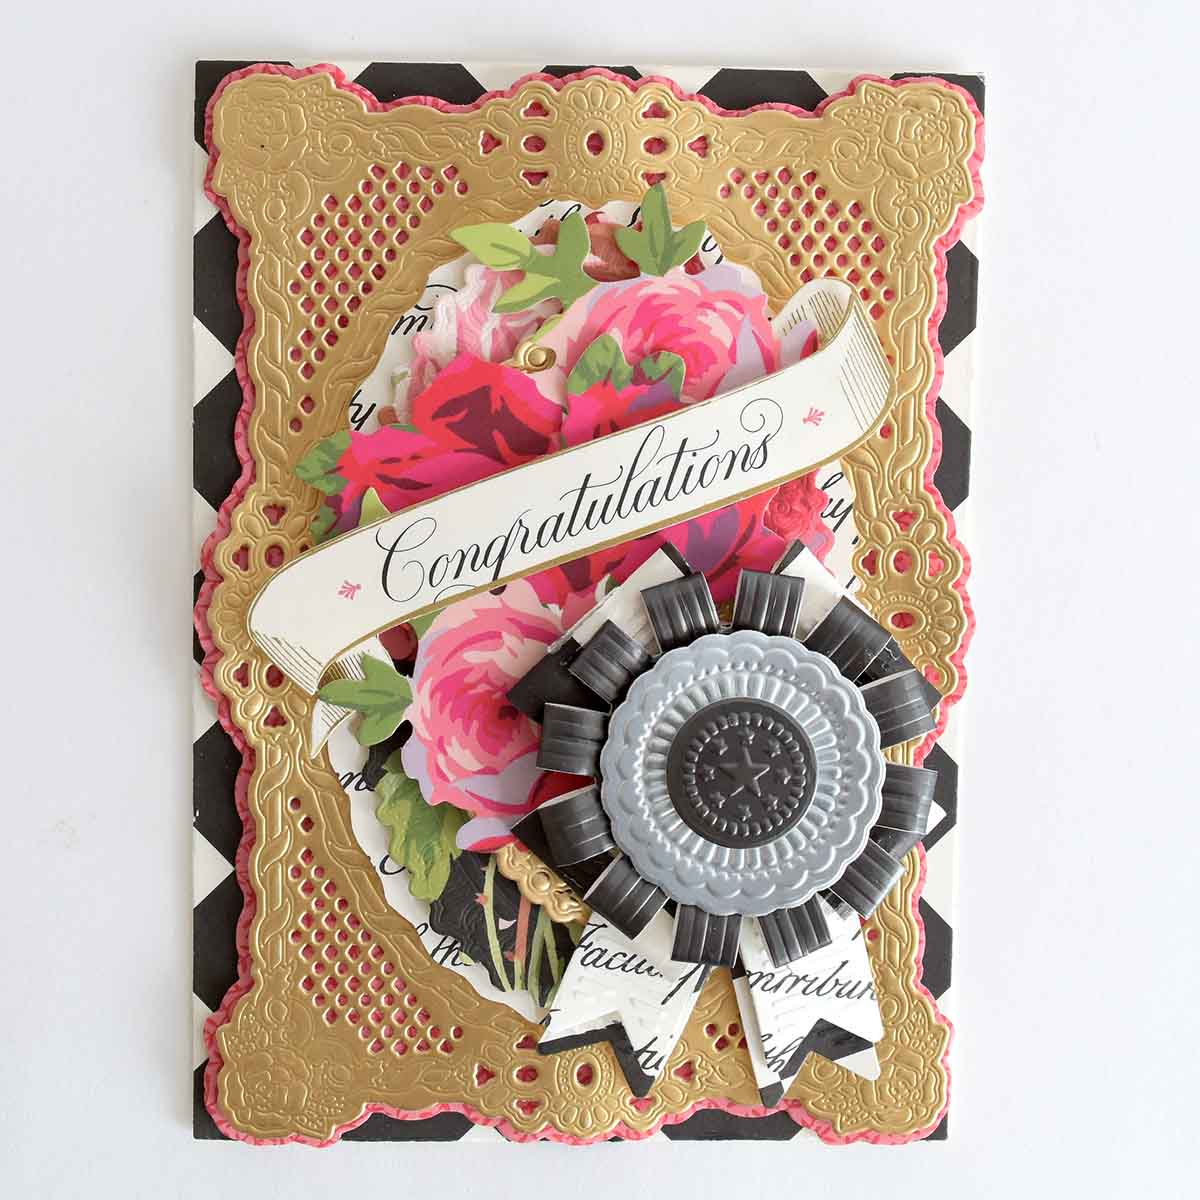 a congratulations card with flowers and ribbons.